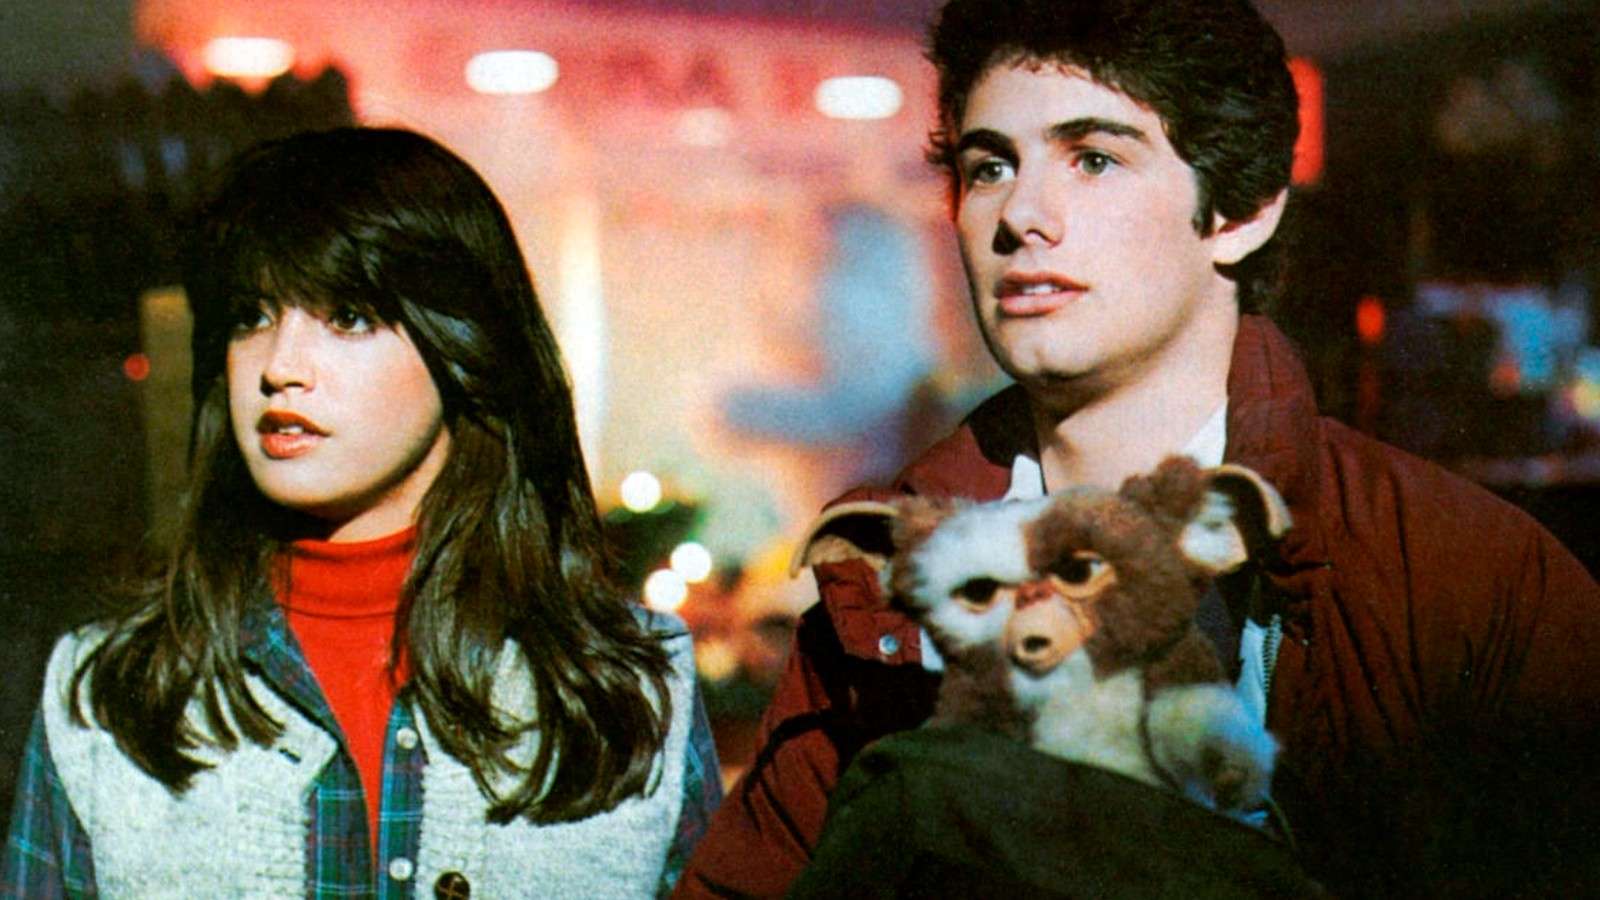 Kate and Billy, holding little Gizmo in Gremlins.